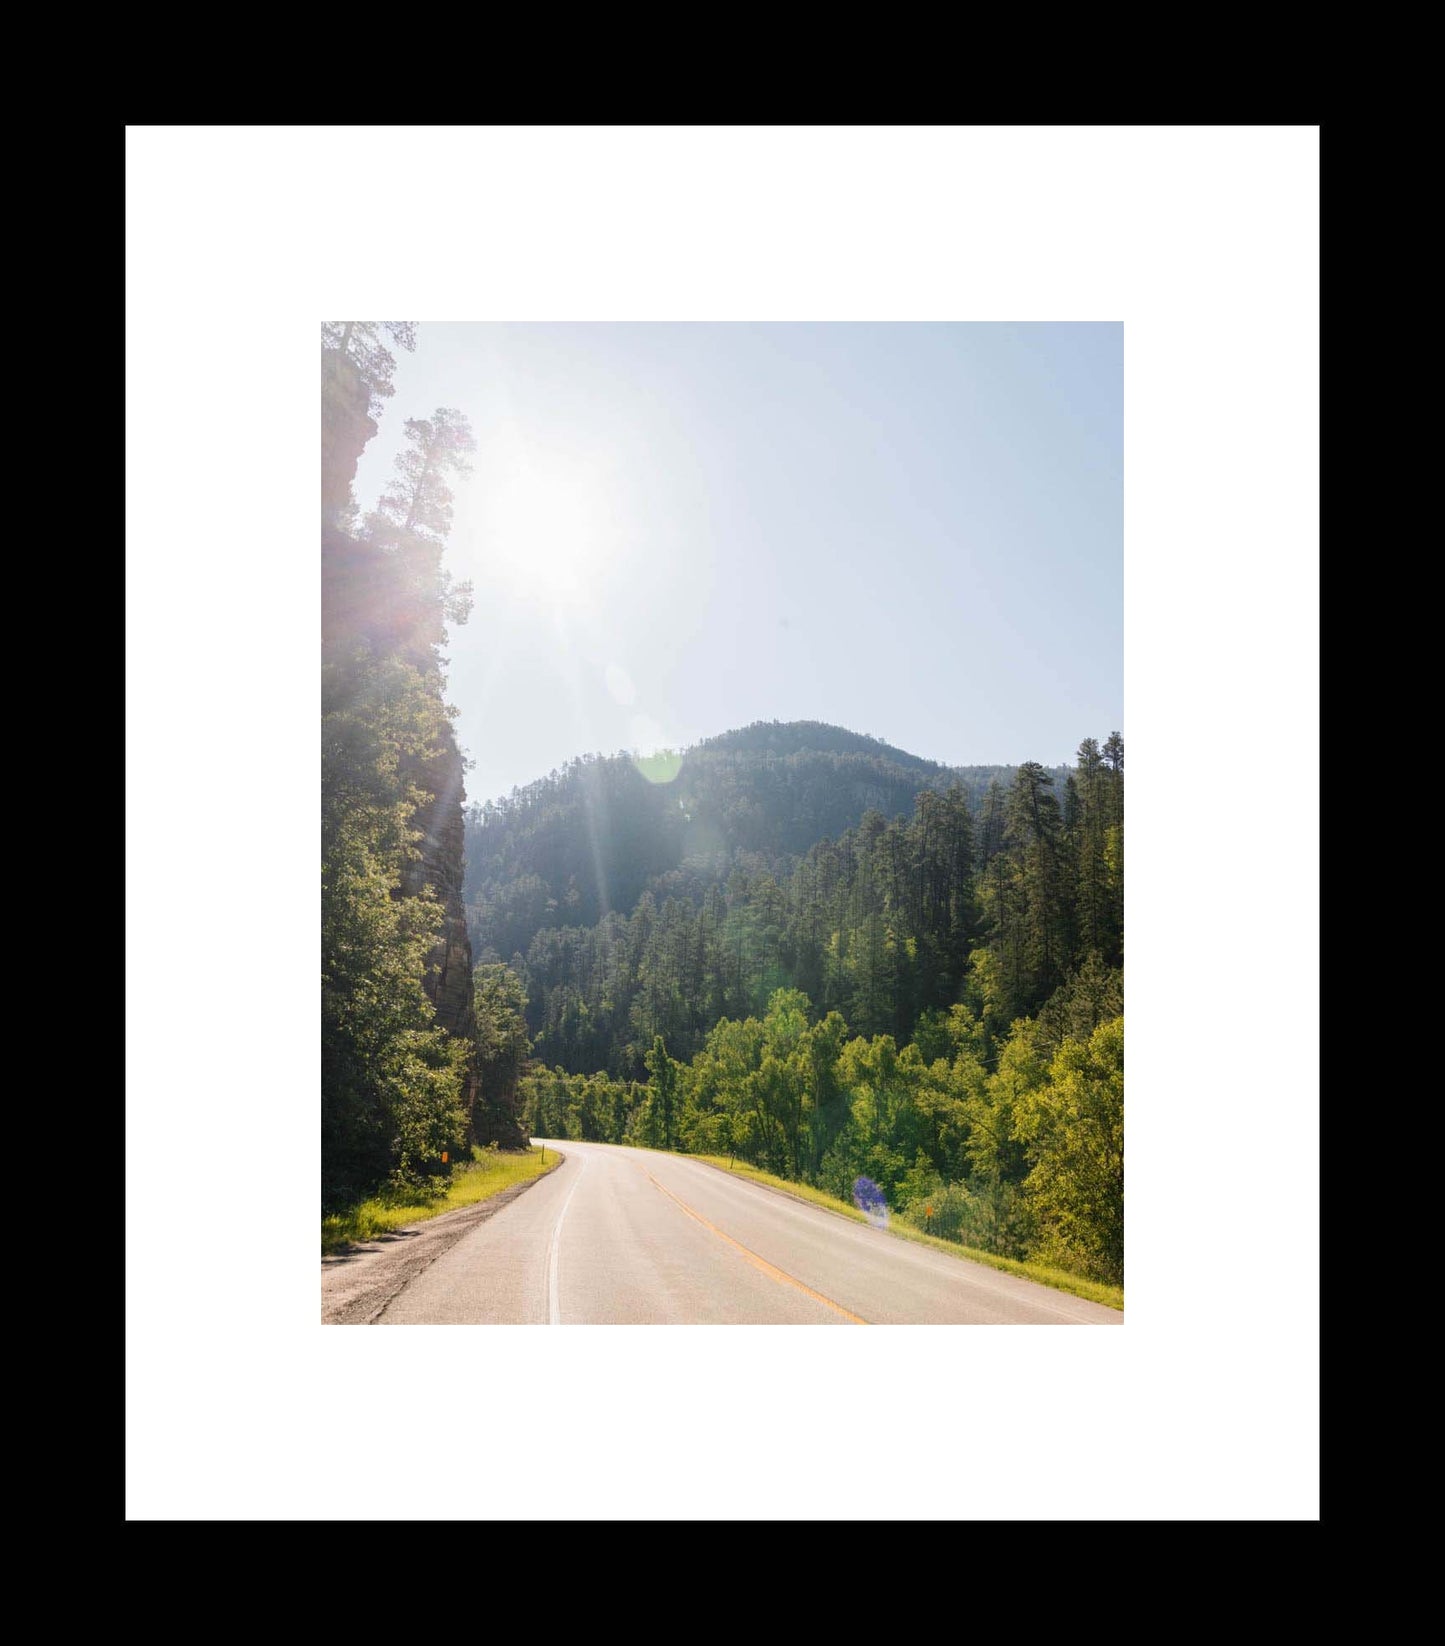 Spearfish Canyon Scenic Byway, Road Photography Print, South Dakota Photo or Canvas, Midwestern Landscape Travel Art Print - eireanneilis